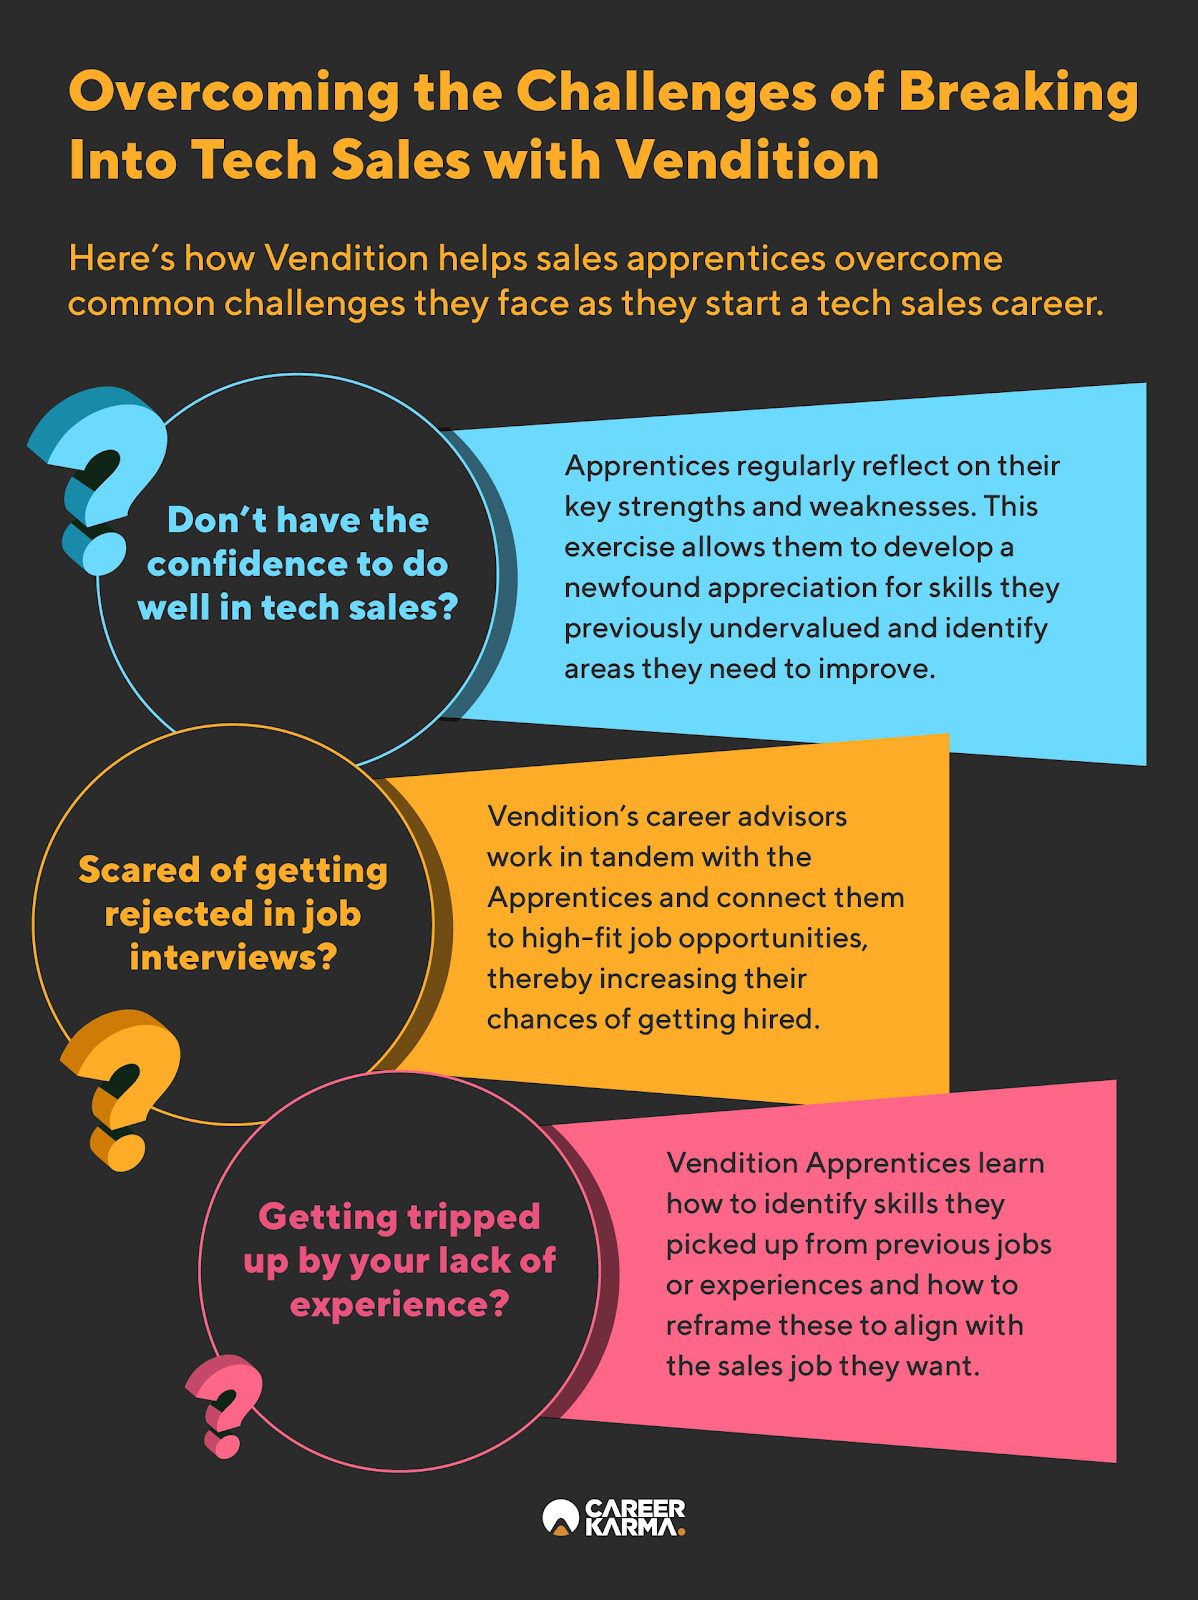 An infographic highlighting how Vendition helps sales apprentices overcome common challenges